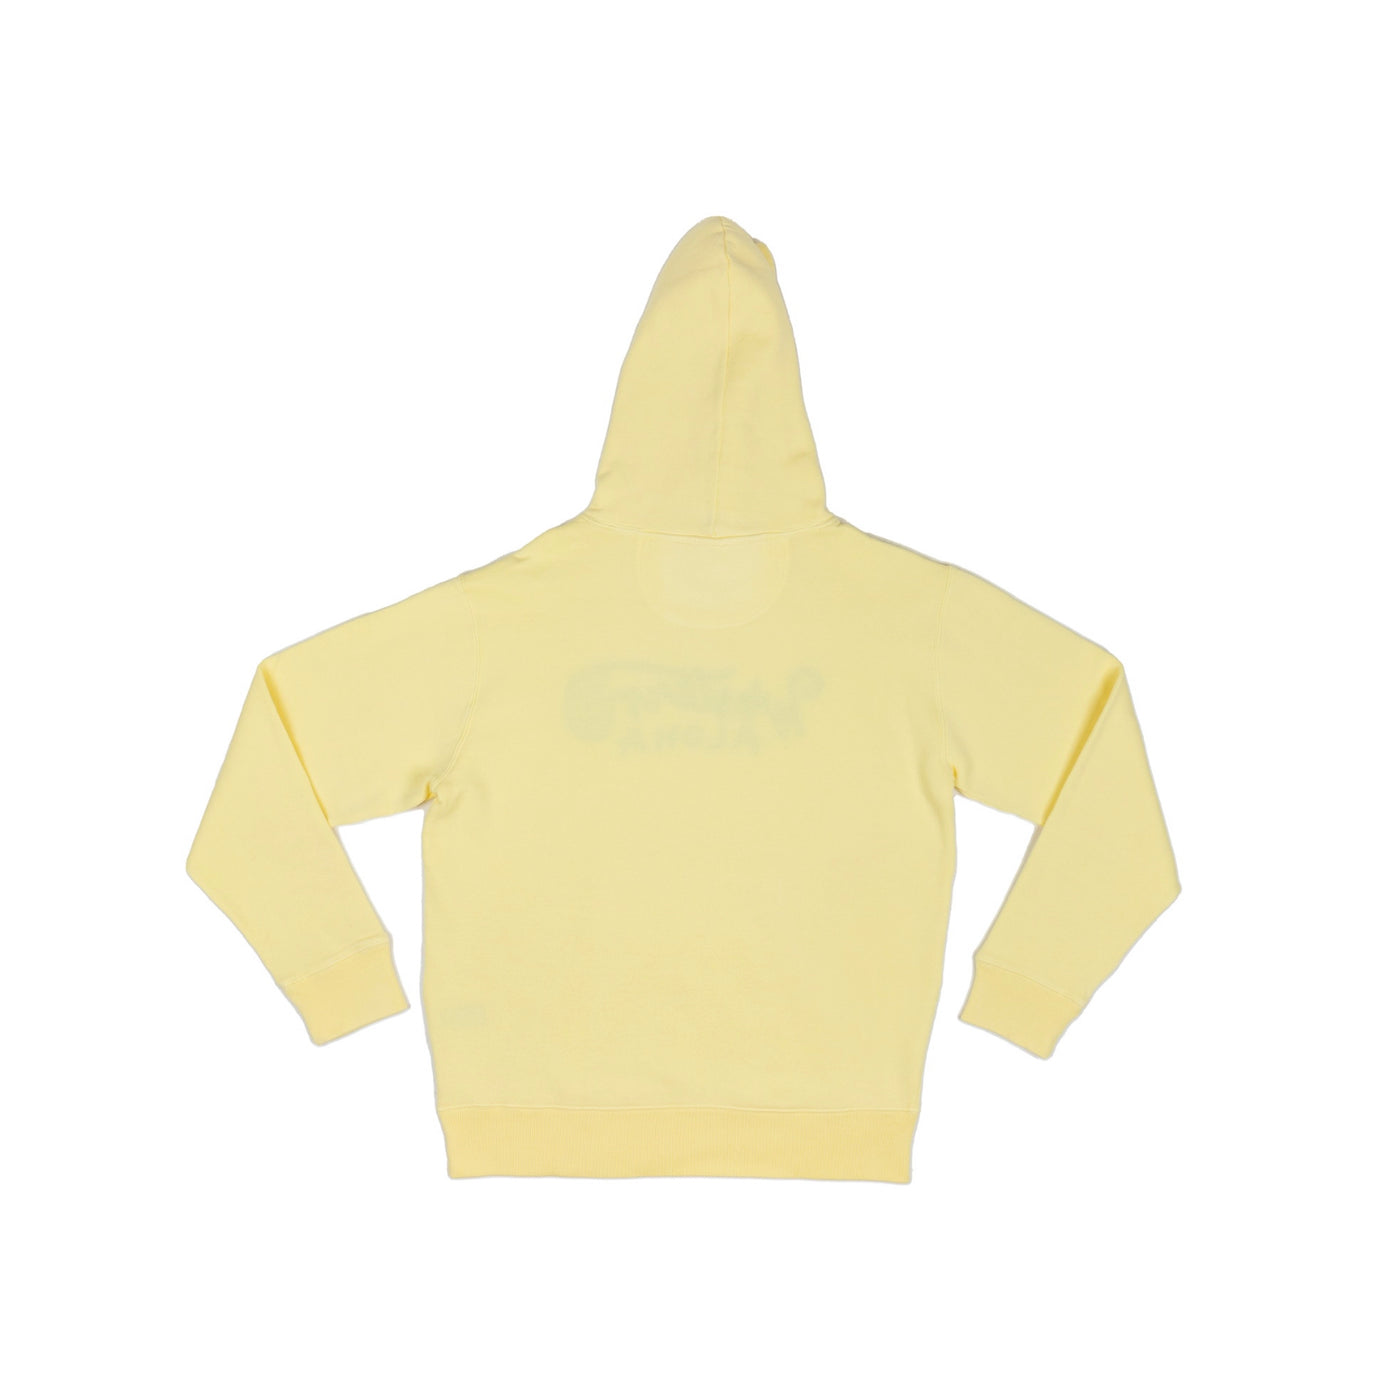 Embroidered Rope Logo Hoodie